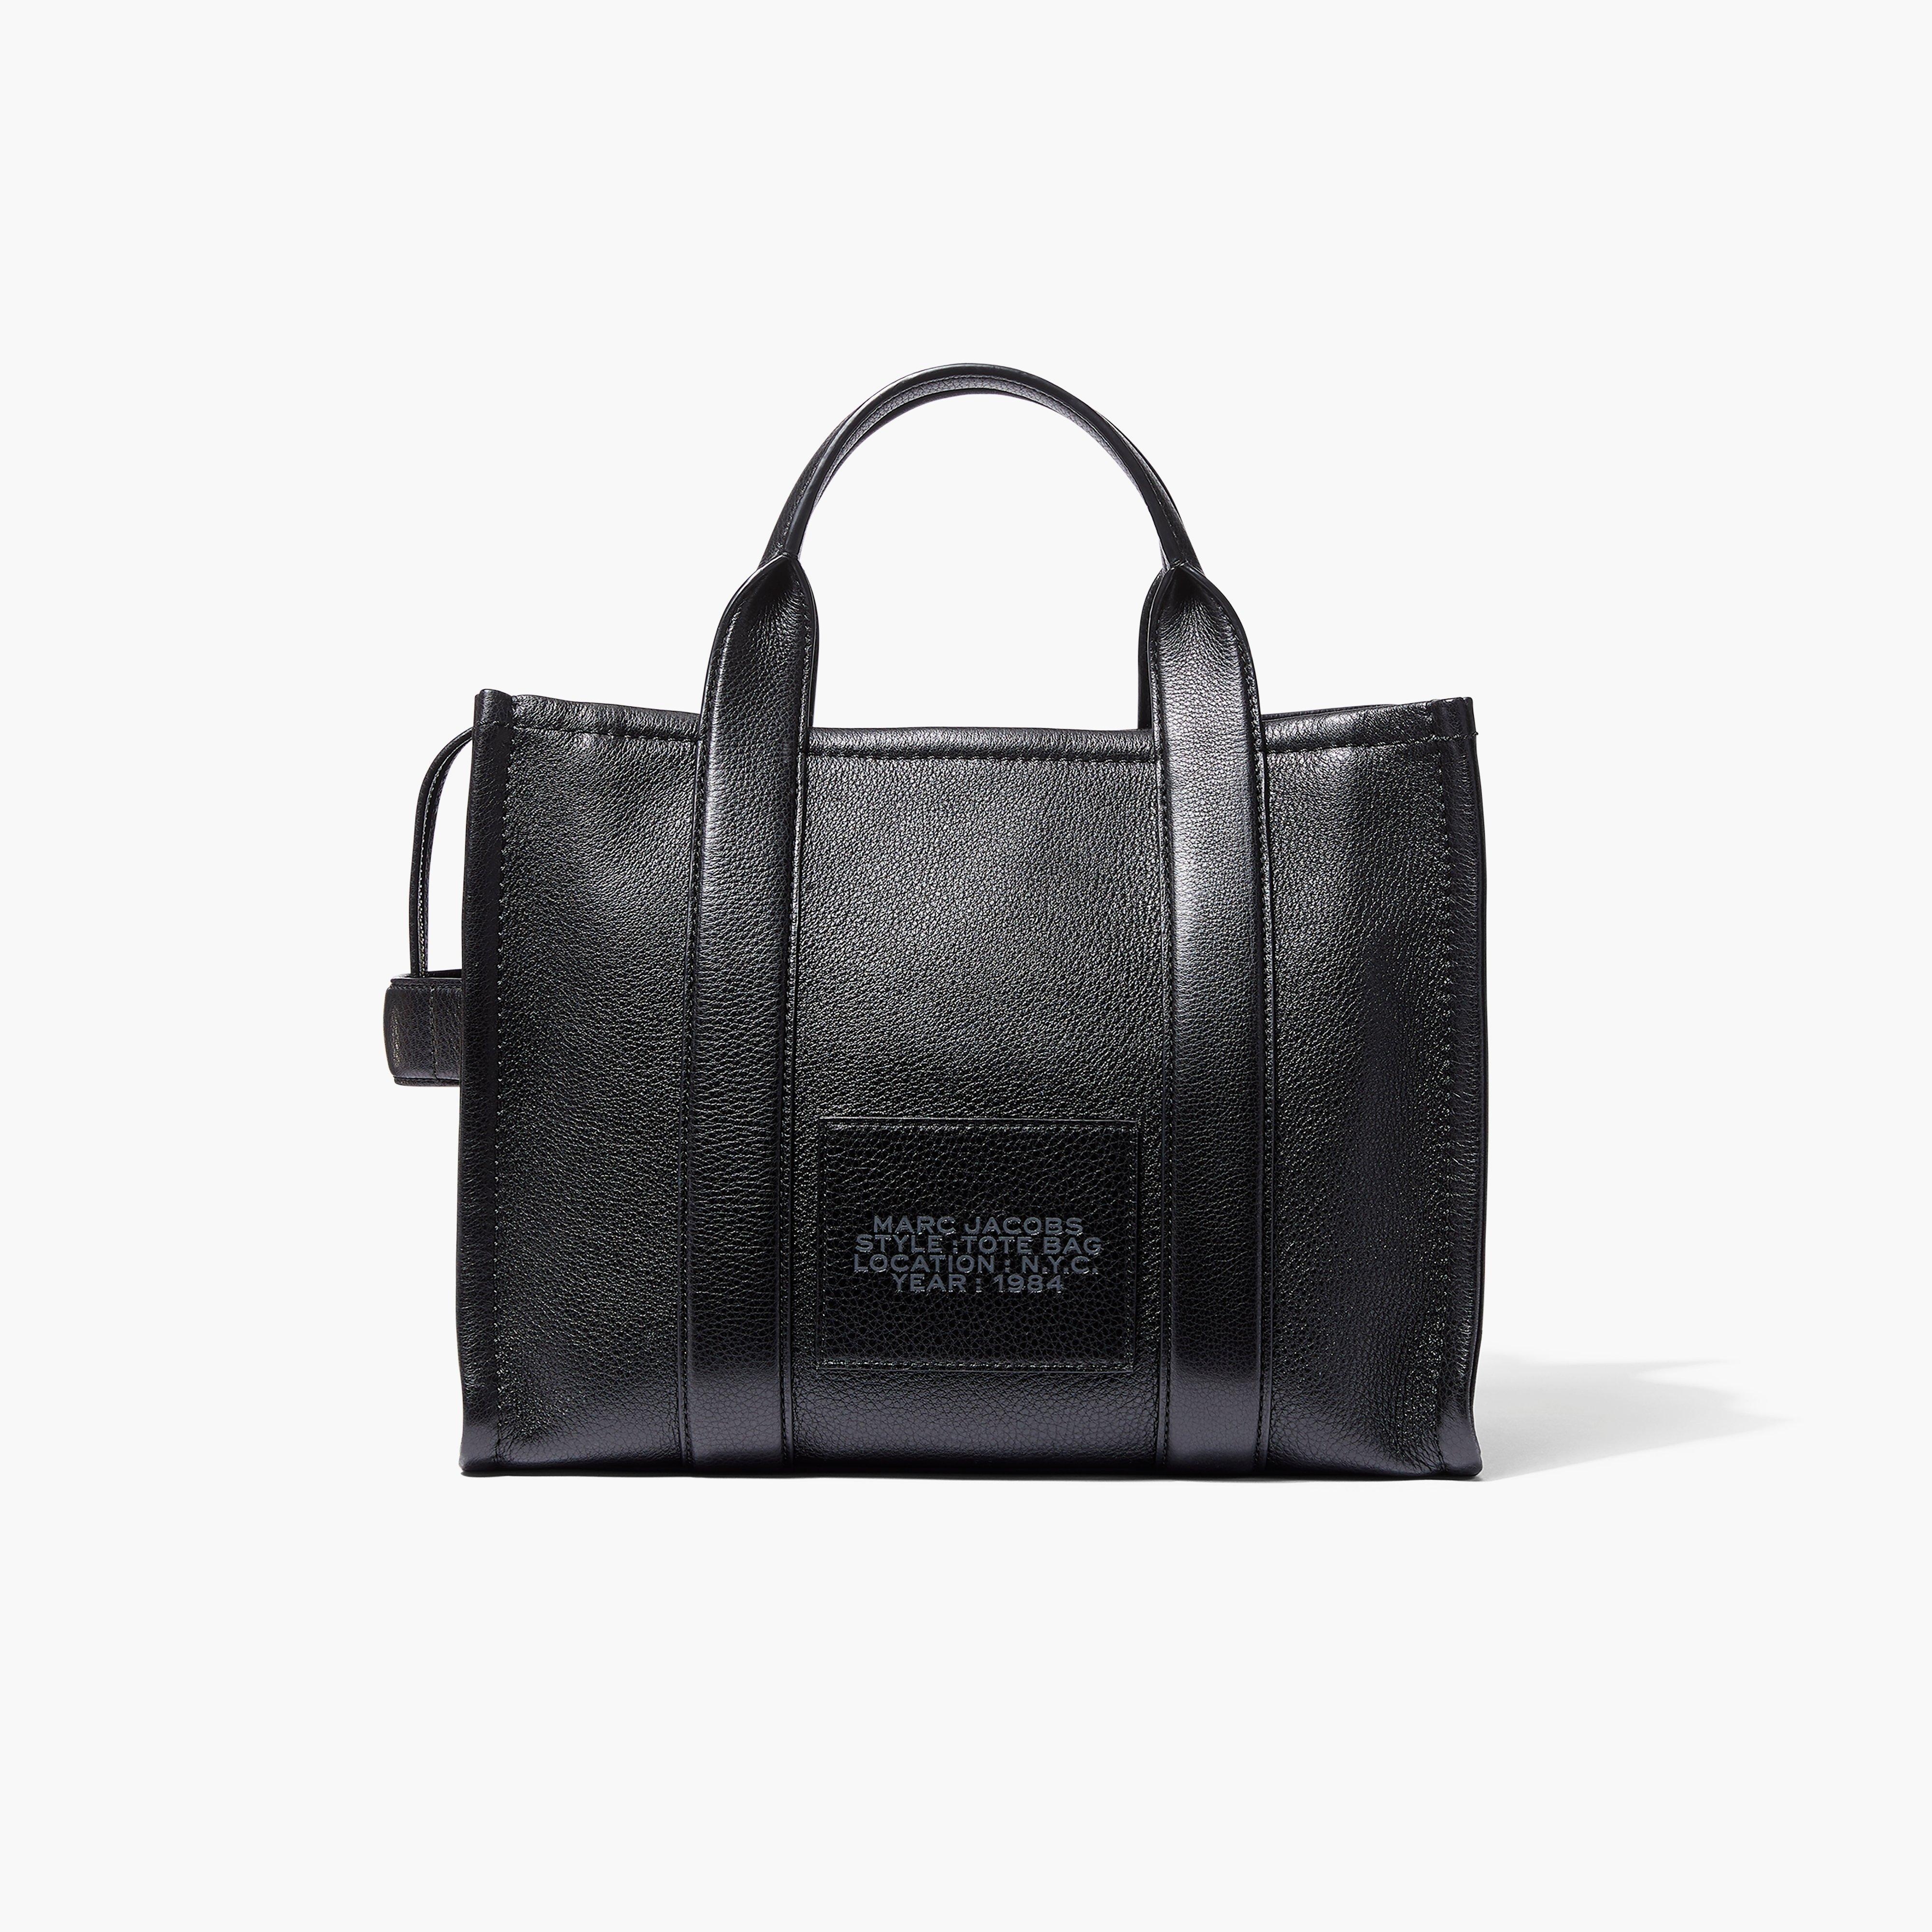 THE LEATHER SMALL TOTE BAG - 8